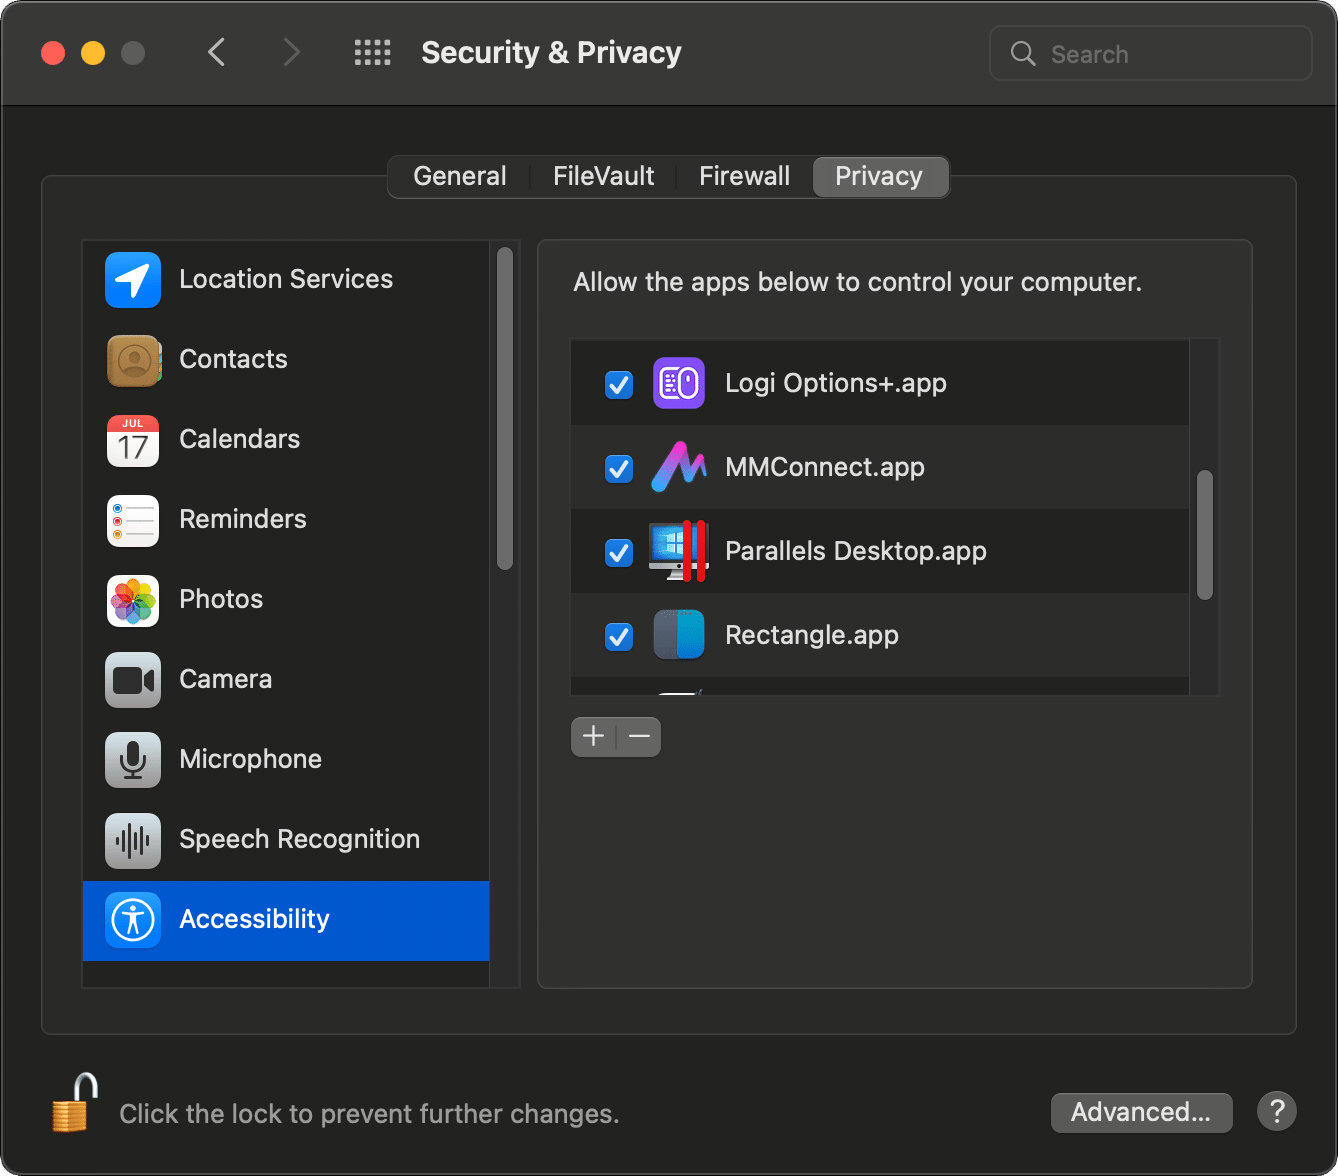 MacOS System Preferences with MMConnect enabled for Accessibility permissions.